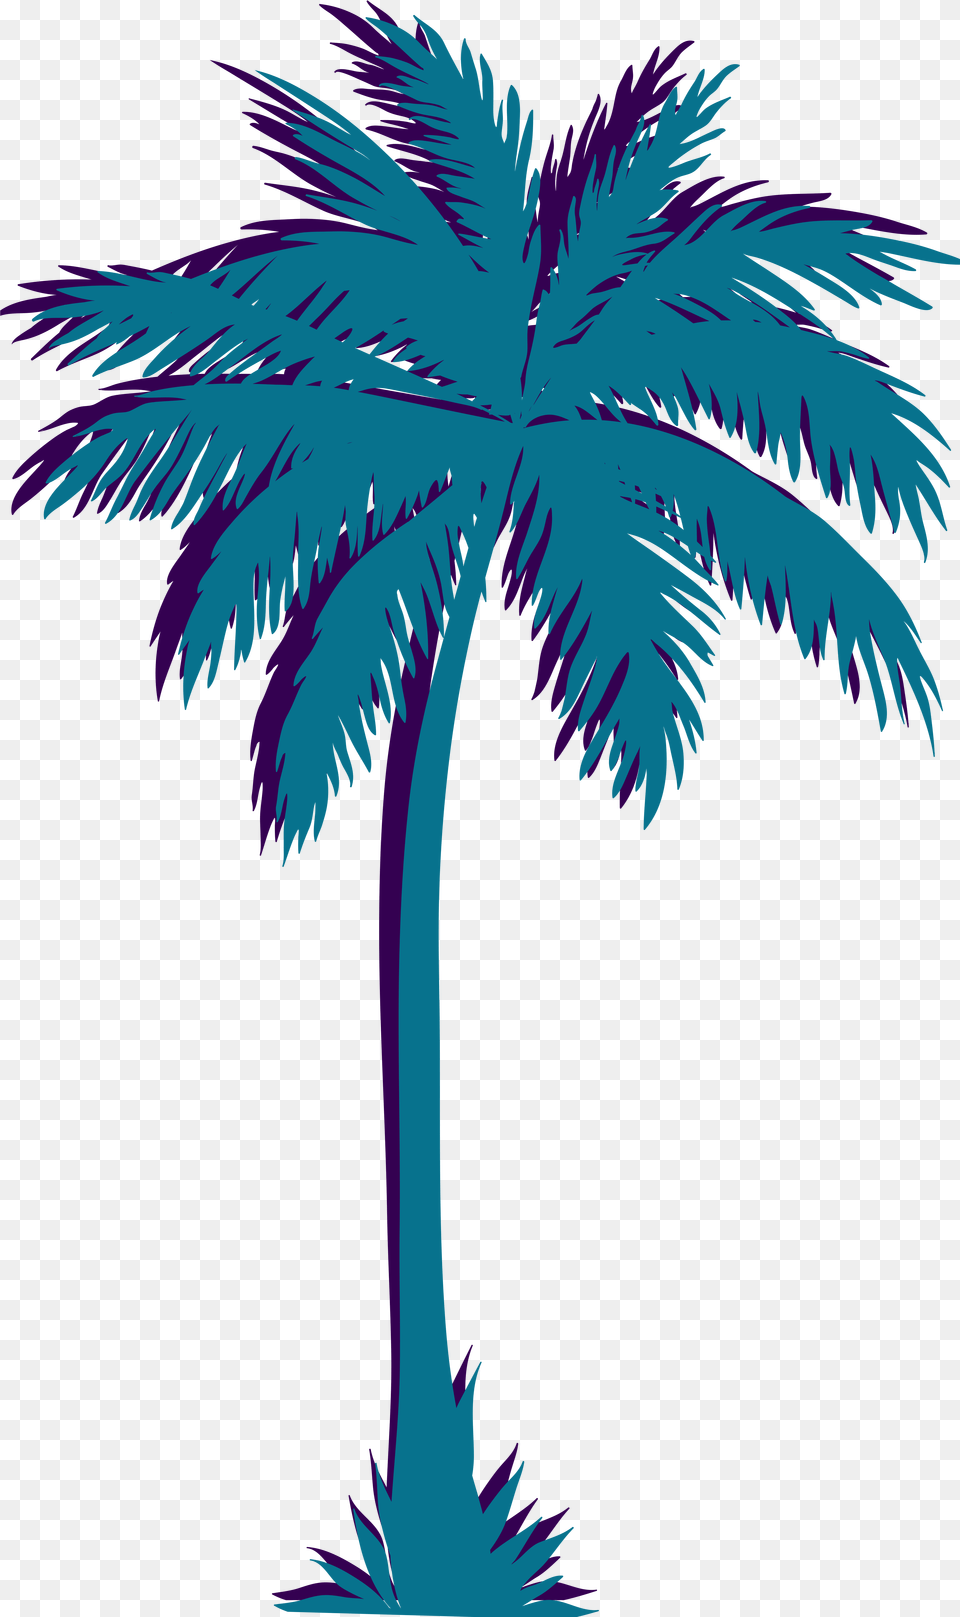 Palm Tree Vaporwave Vaporwave Palm Tree, Palm Tree, Plant Png